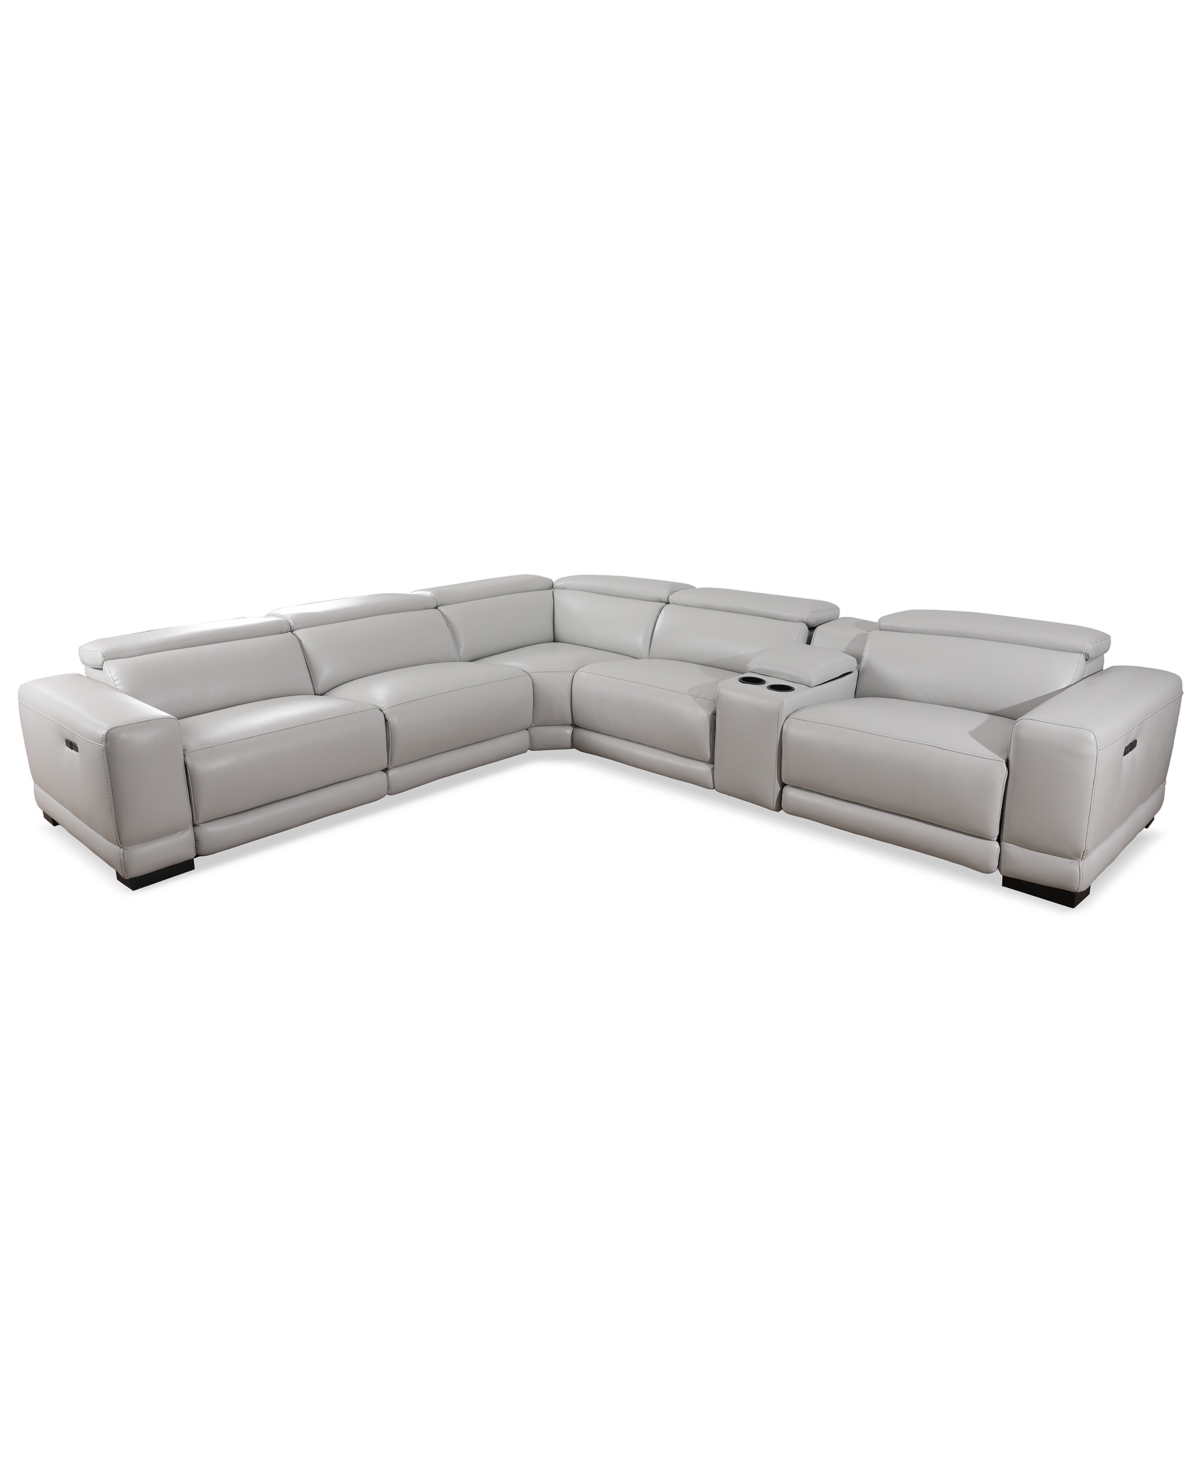 Furniture Krofton 6-pc. Beyond Leather Fabric Sectional L With 3 Power Motion Recliners And 1 Console, Created In Fog